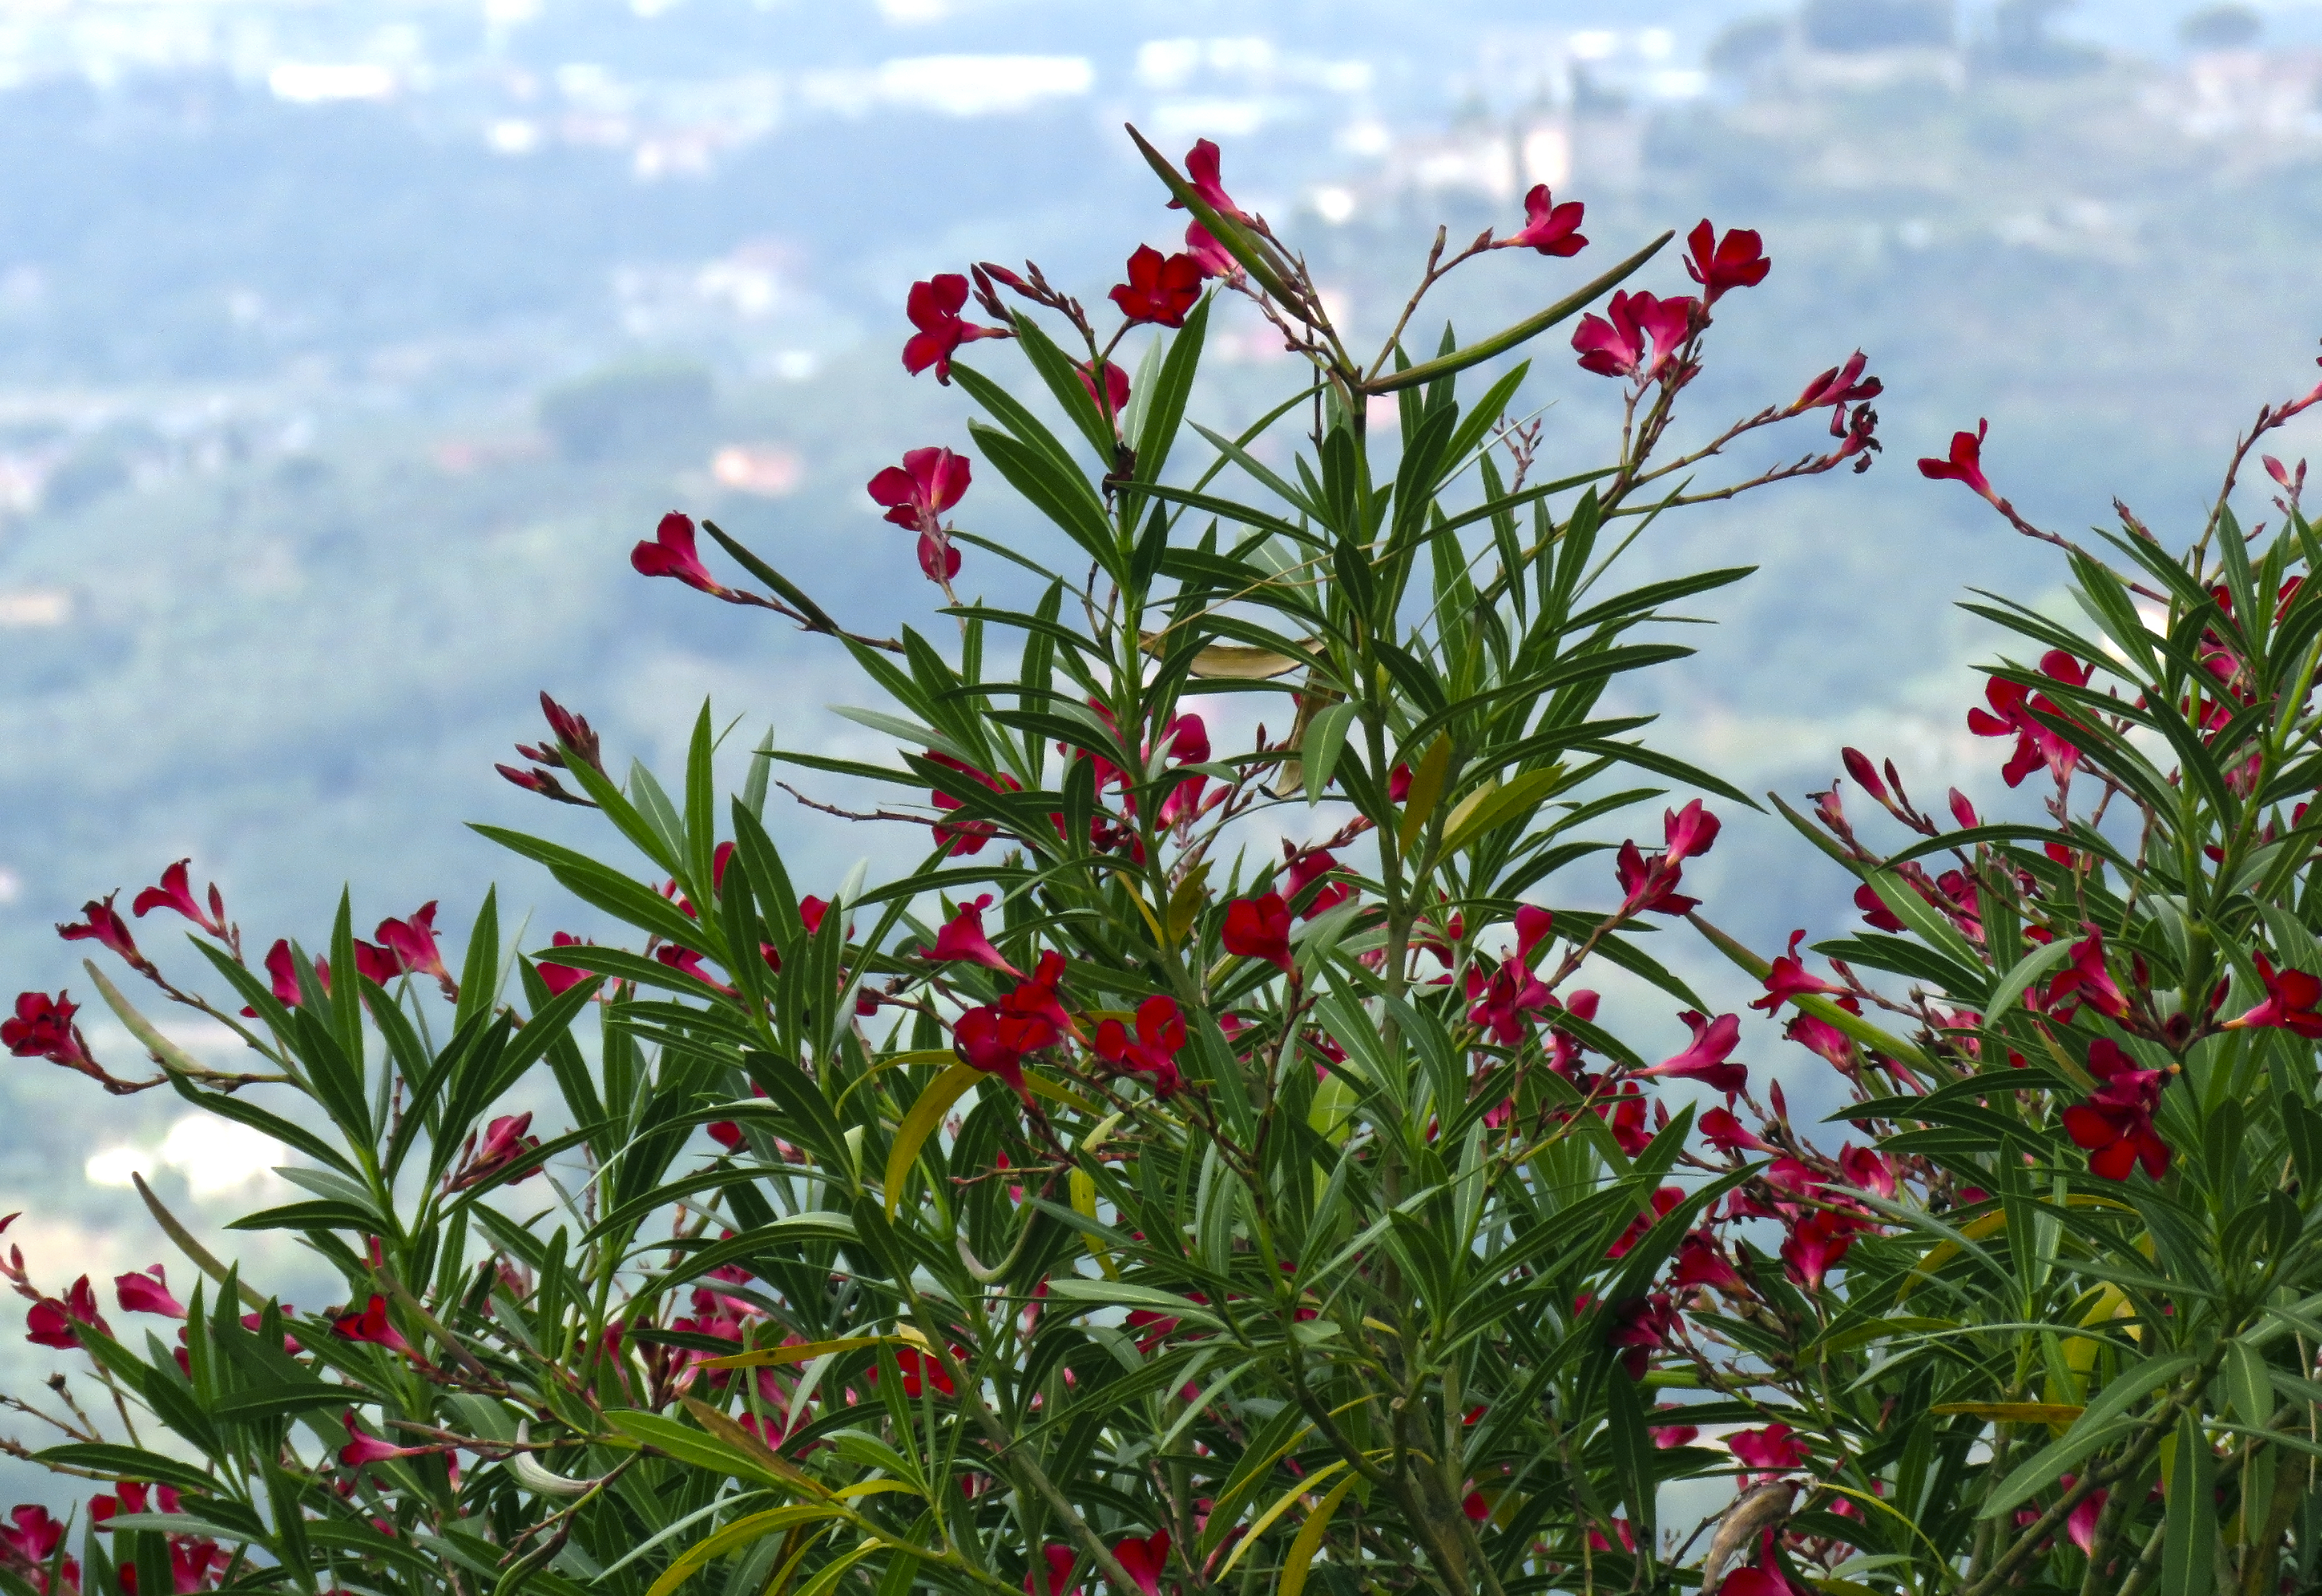 Red Flowers In Tuscany.jpg